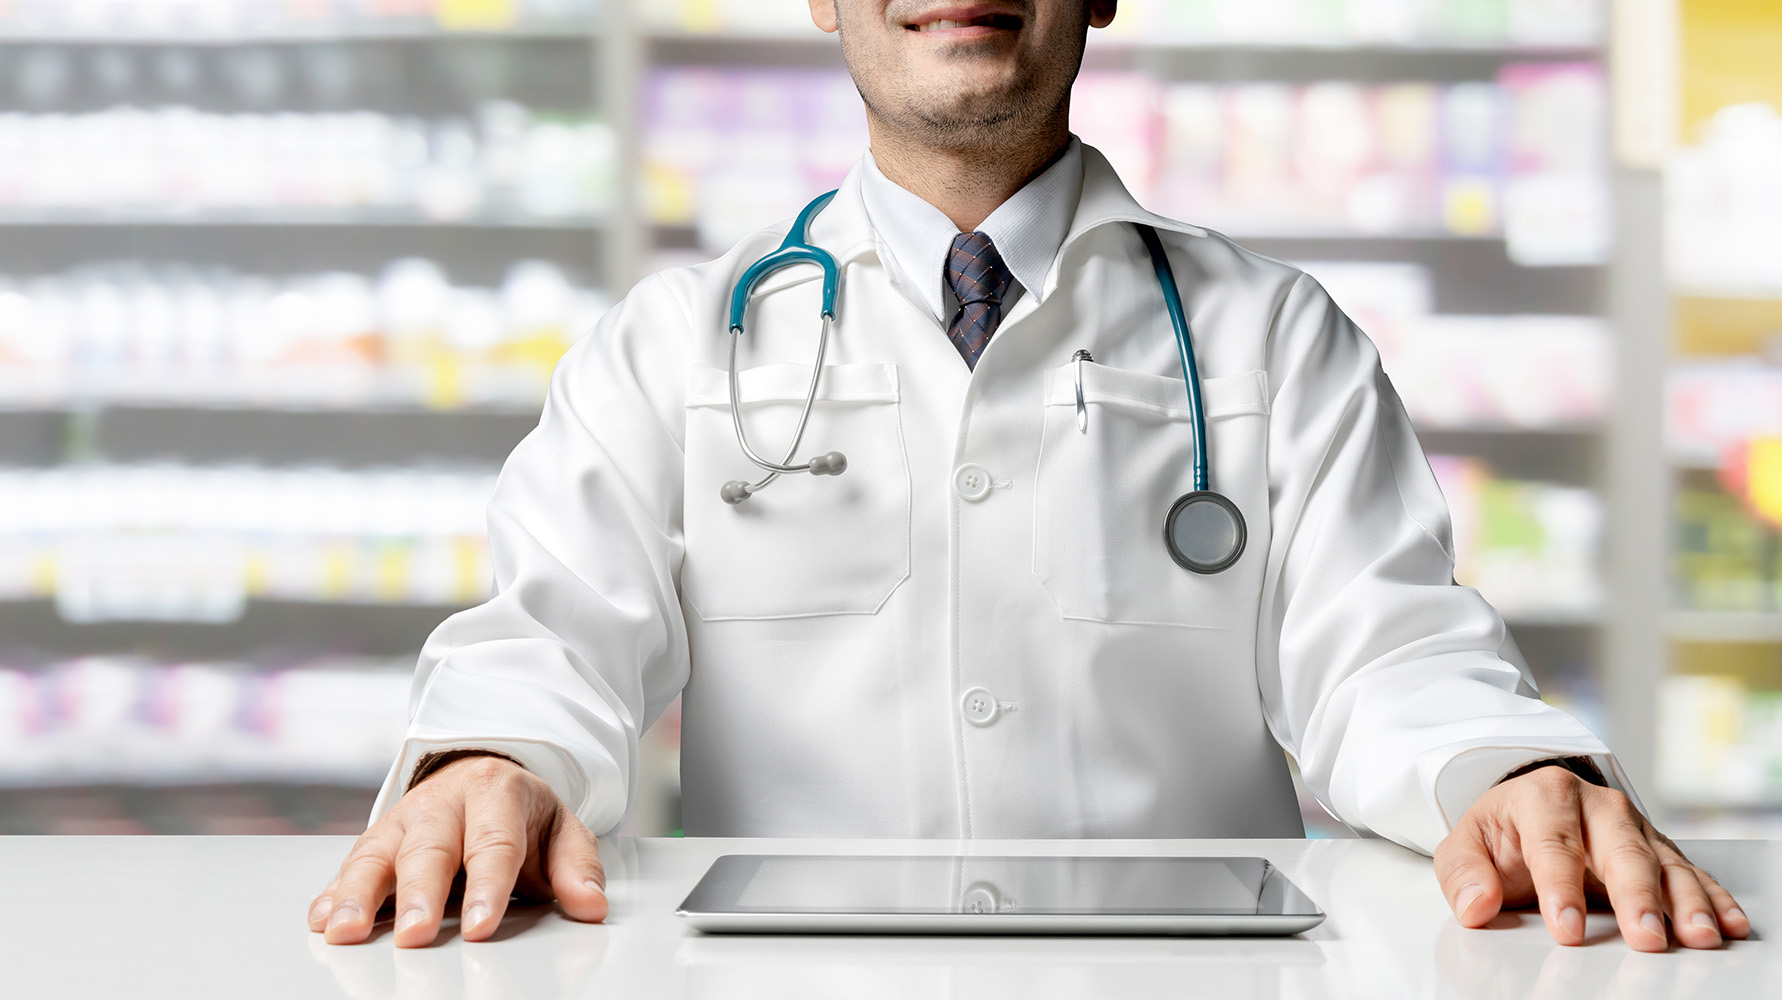 Male pharmacist sitting at table with tablet computer in pharmacy office. Medical healthcare staff and drugstore business.